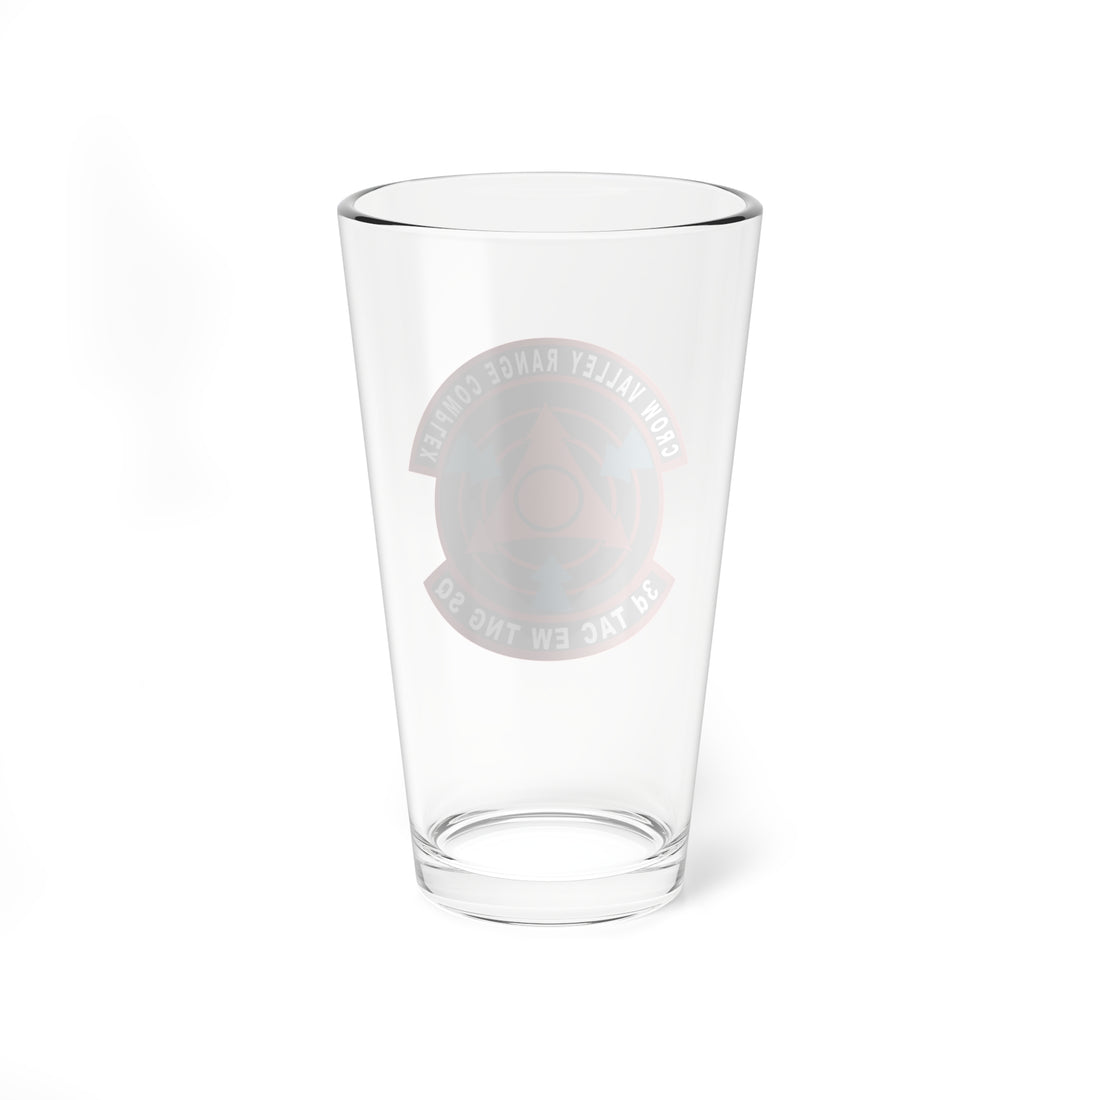 3rd TEWTS Pint Glass, USAF Tactical Electronic Ware Training Squadron Crow Valley Range